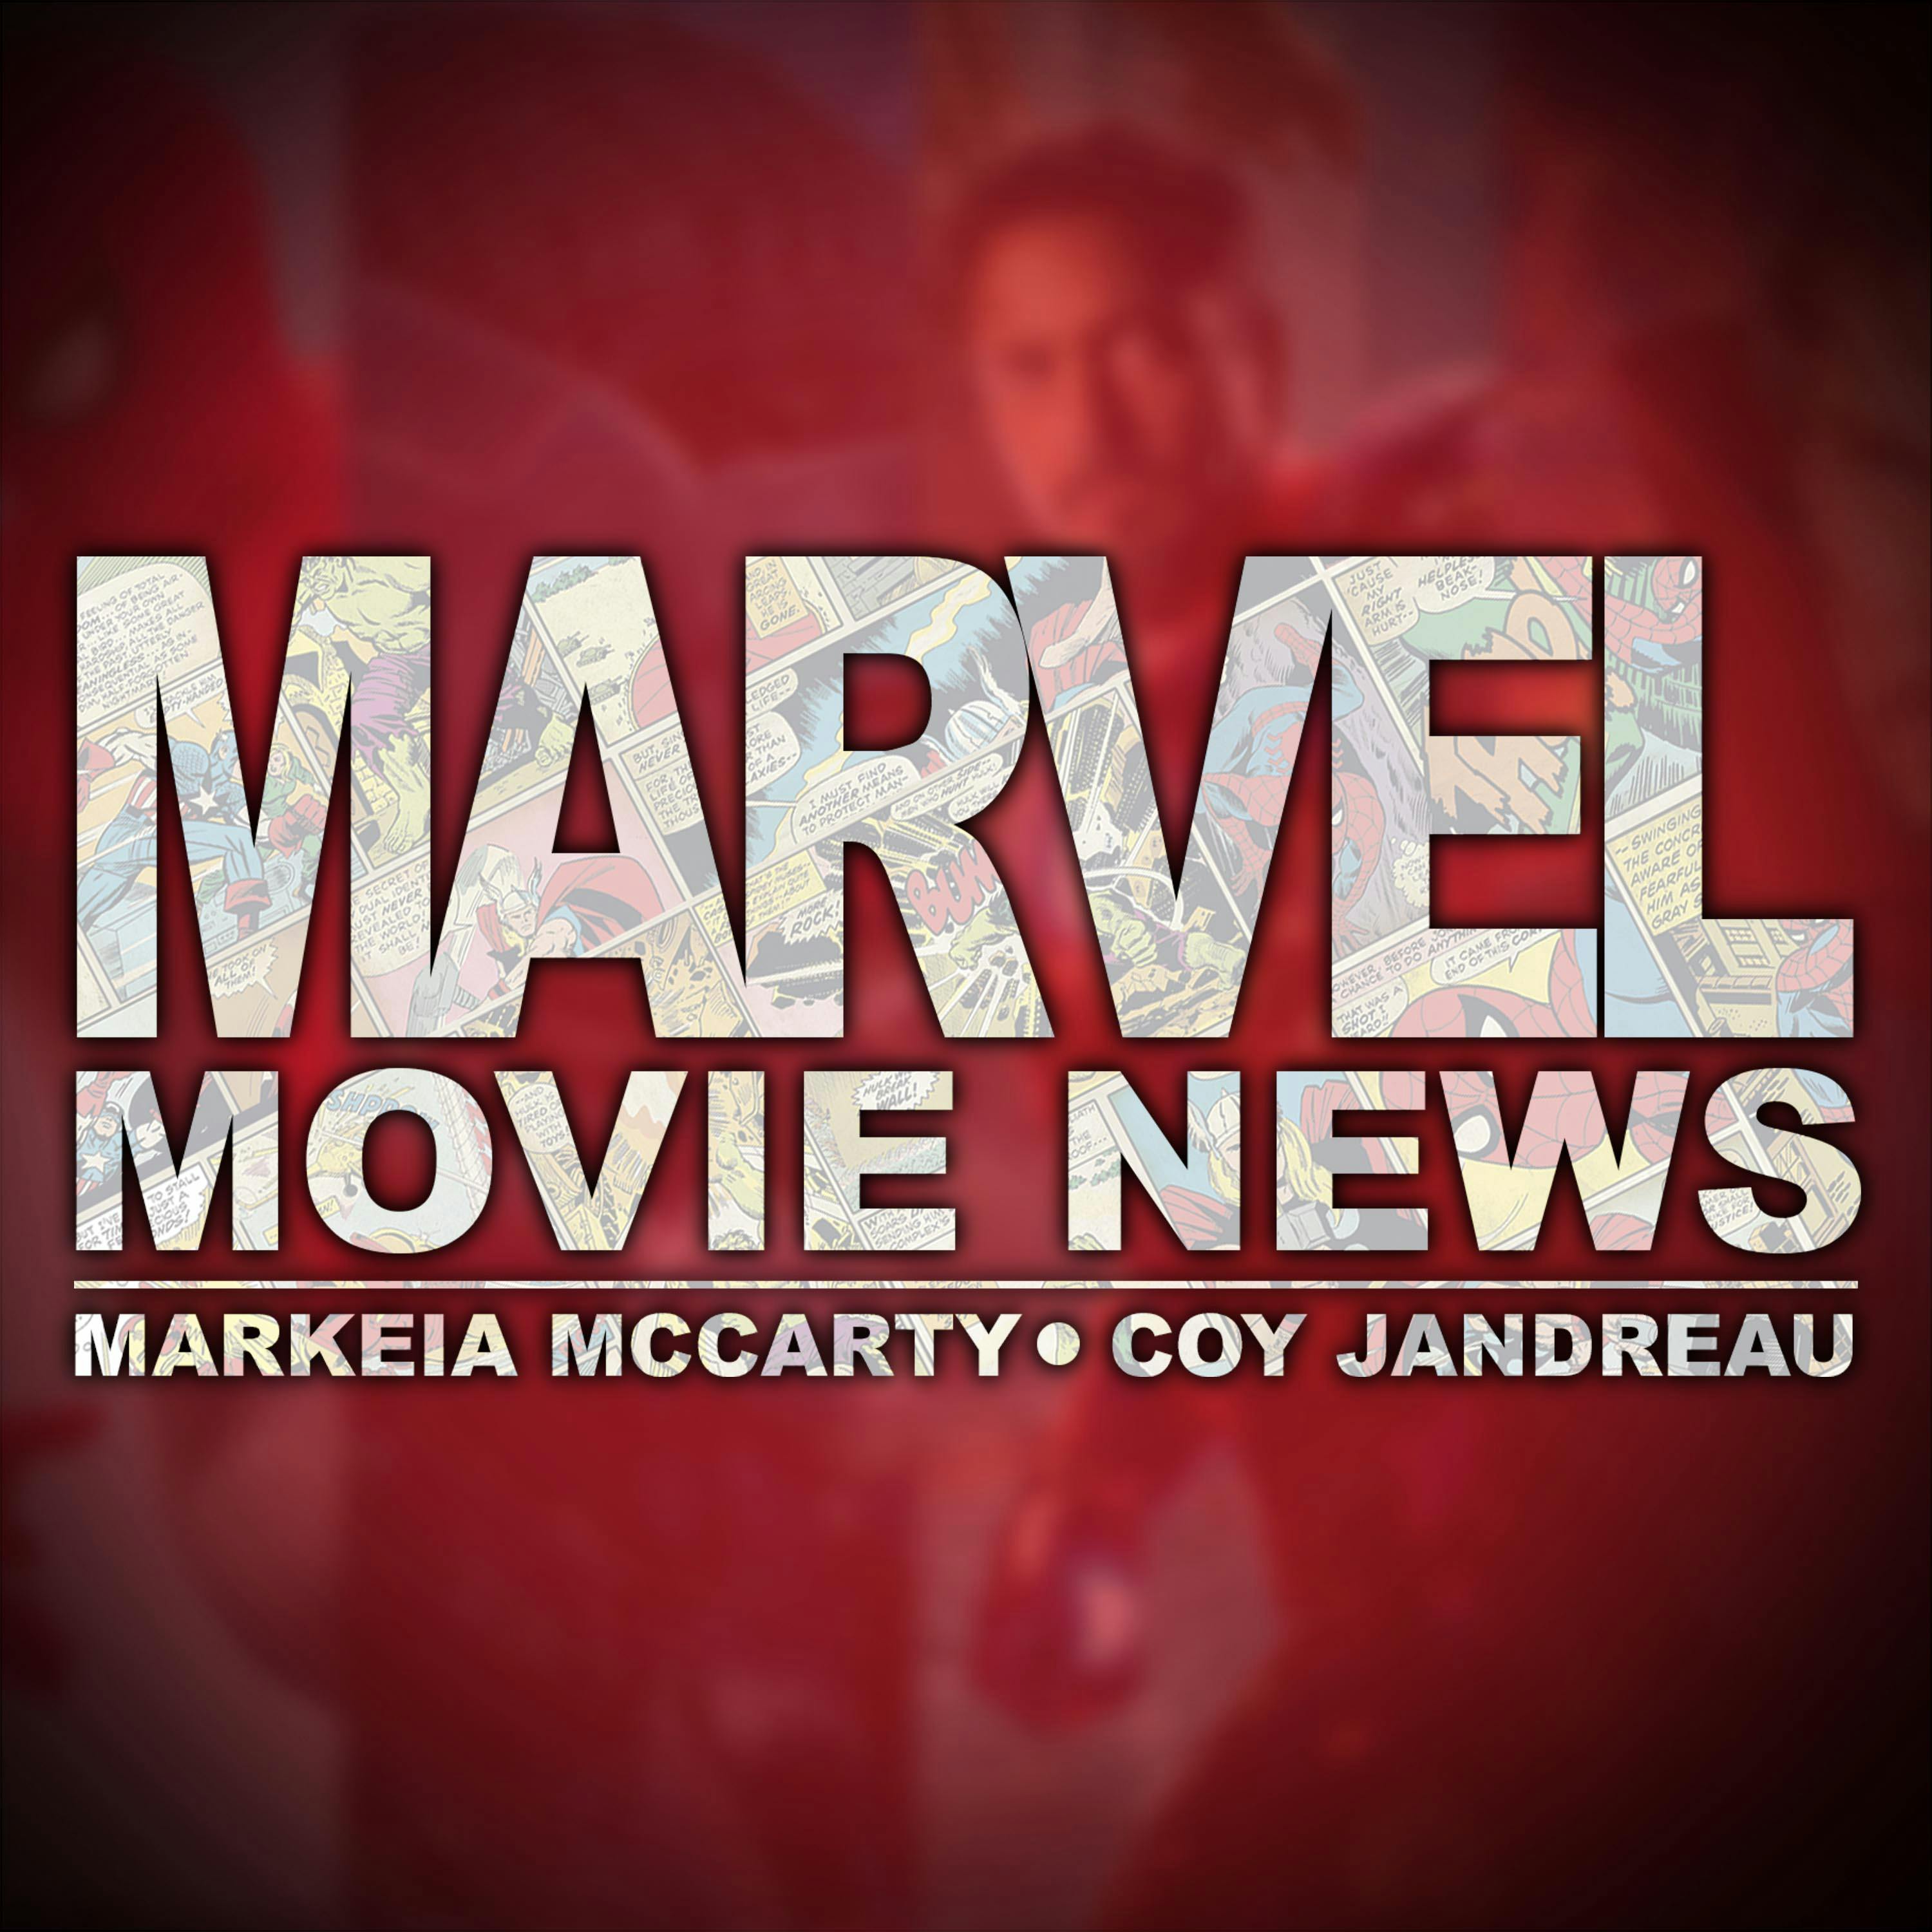 Jane Foster Is Thor! Agent Carter Season 2, and Mutant News! Marvel Movie News Ep #32 – May 14th, 2015